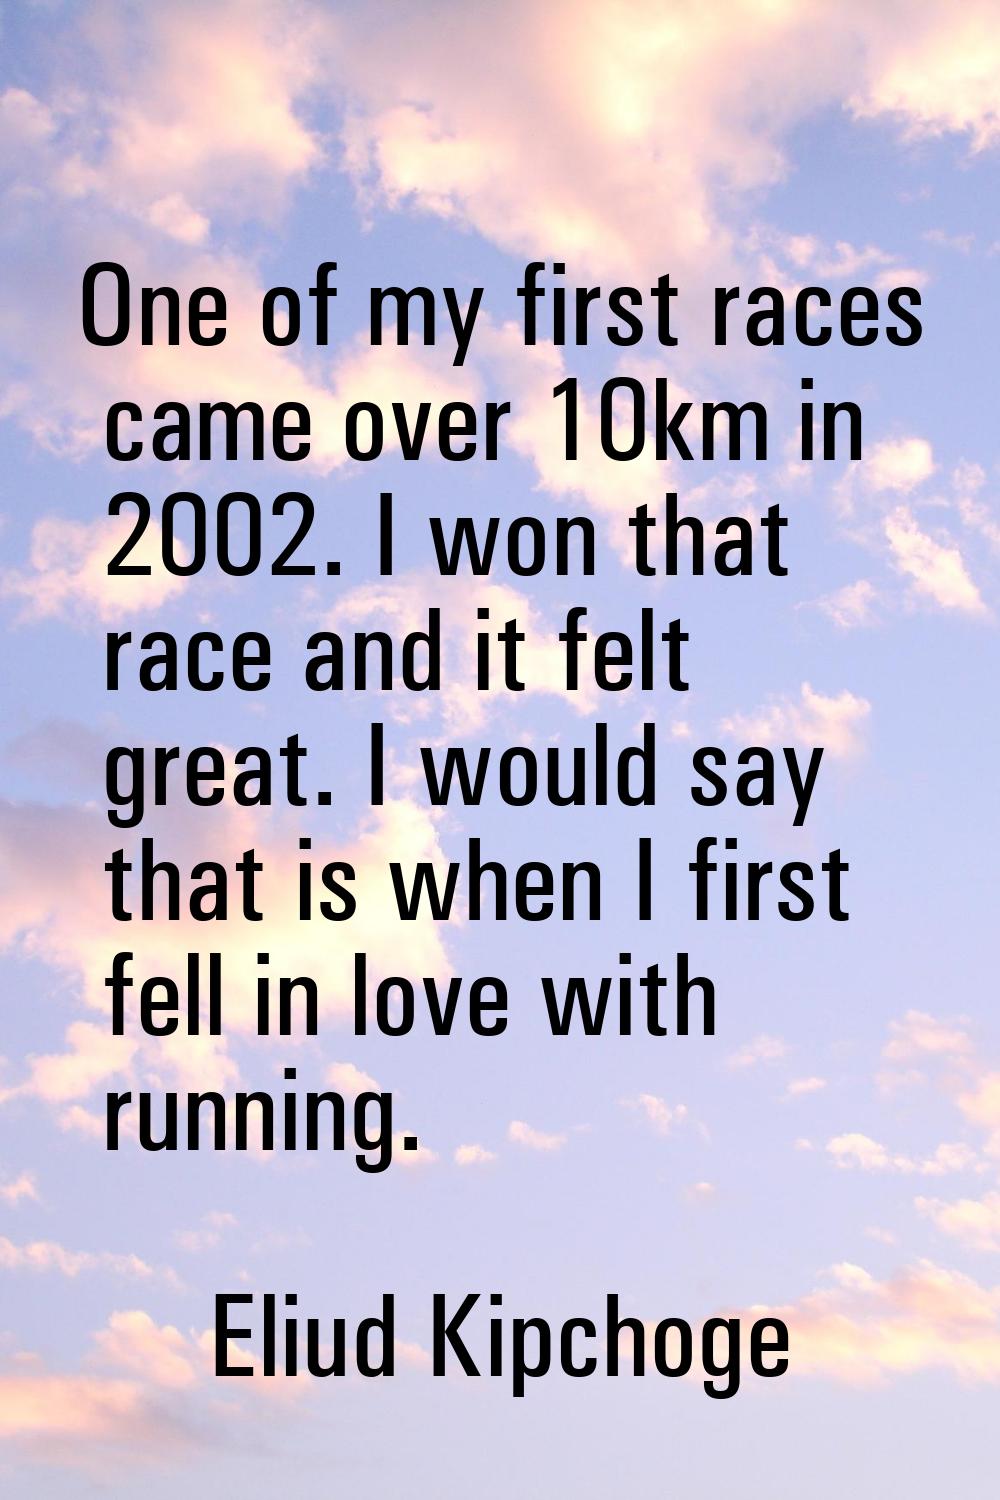 One of my first races came over 10km in 2002. I won that race and it felt great. I would say that i